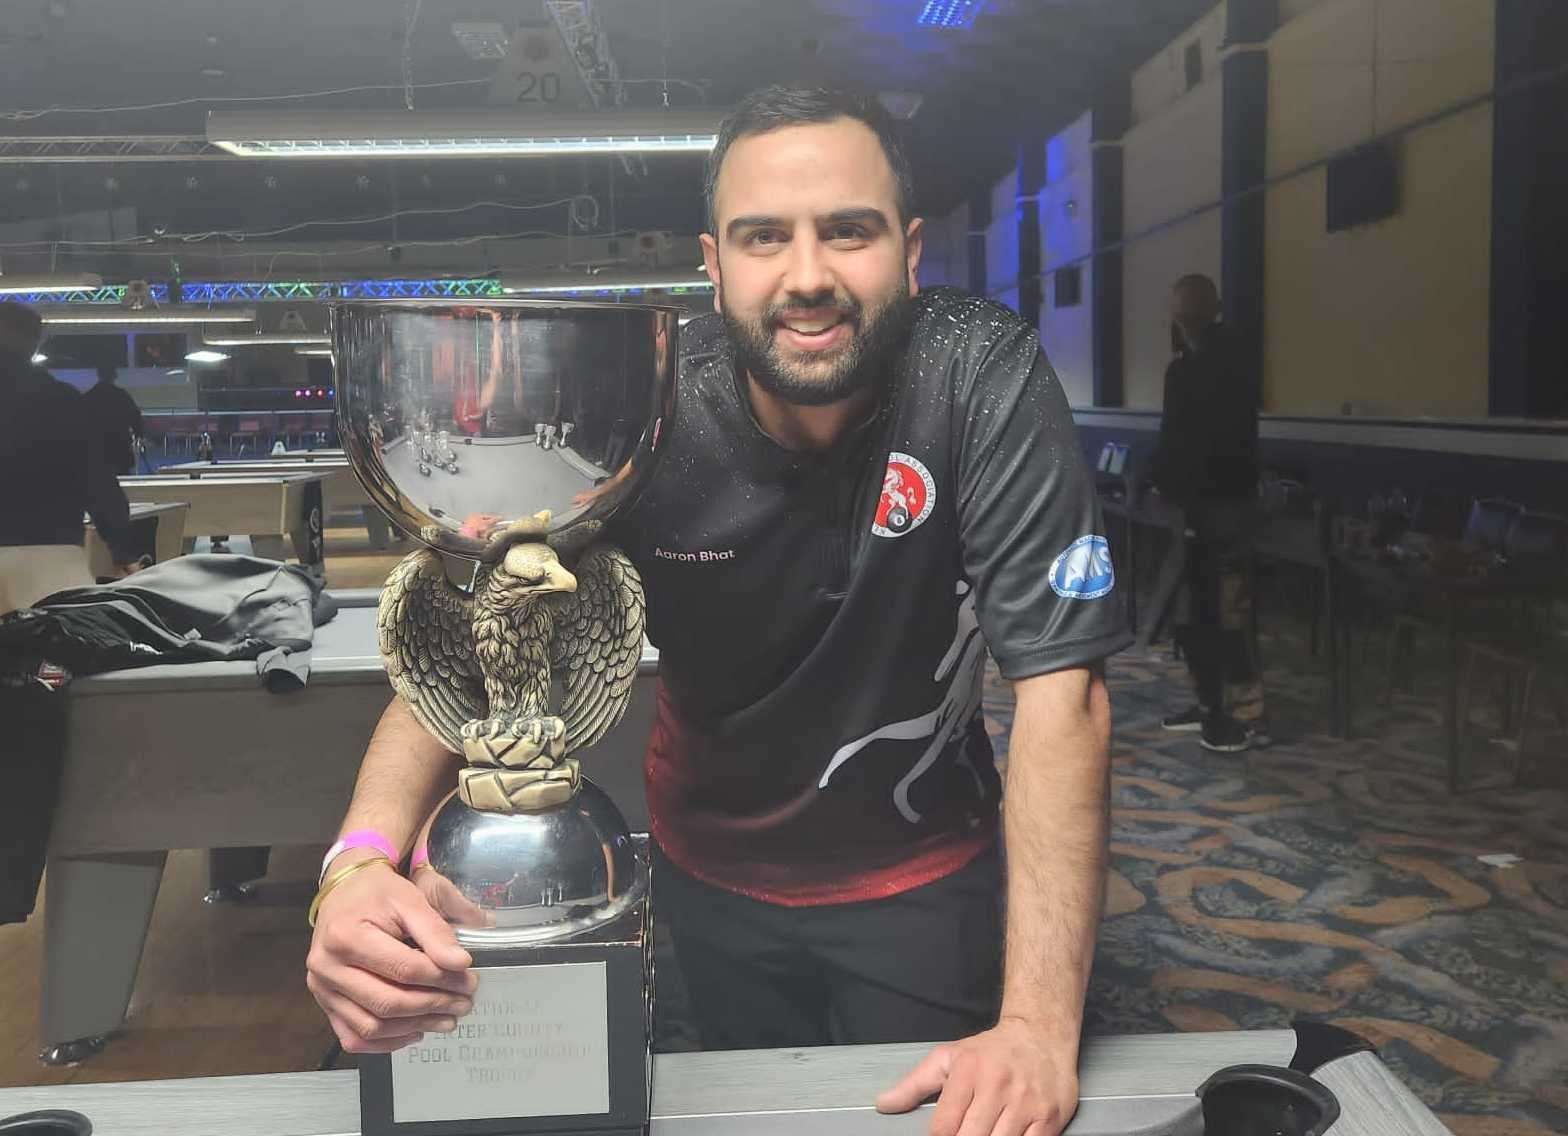 Aaron Bhat of Canterbury with the trophy